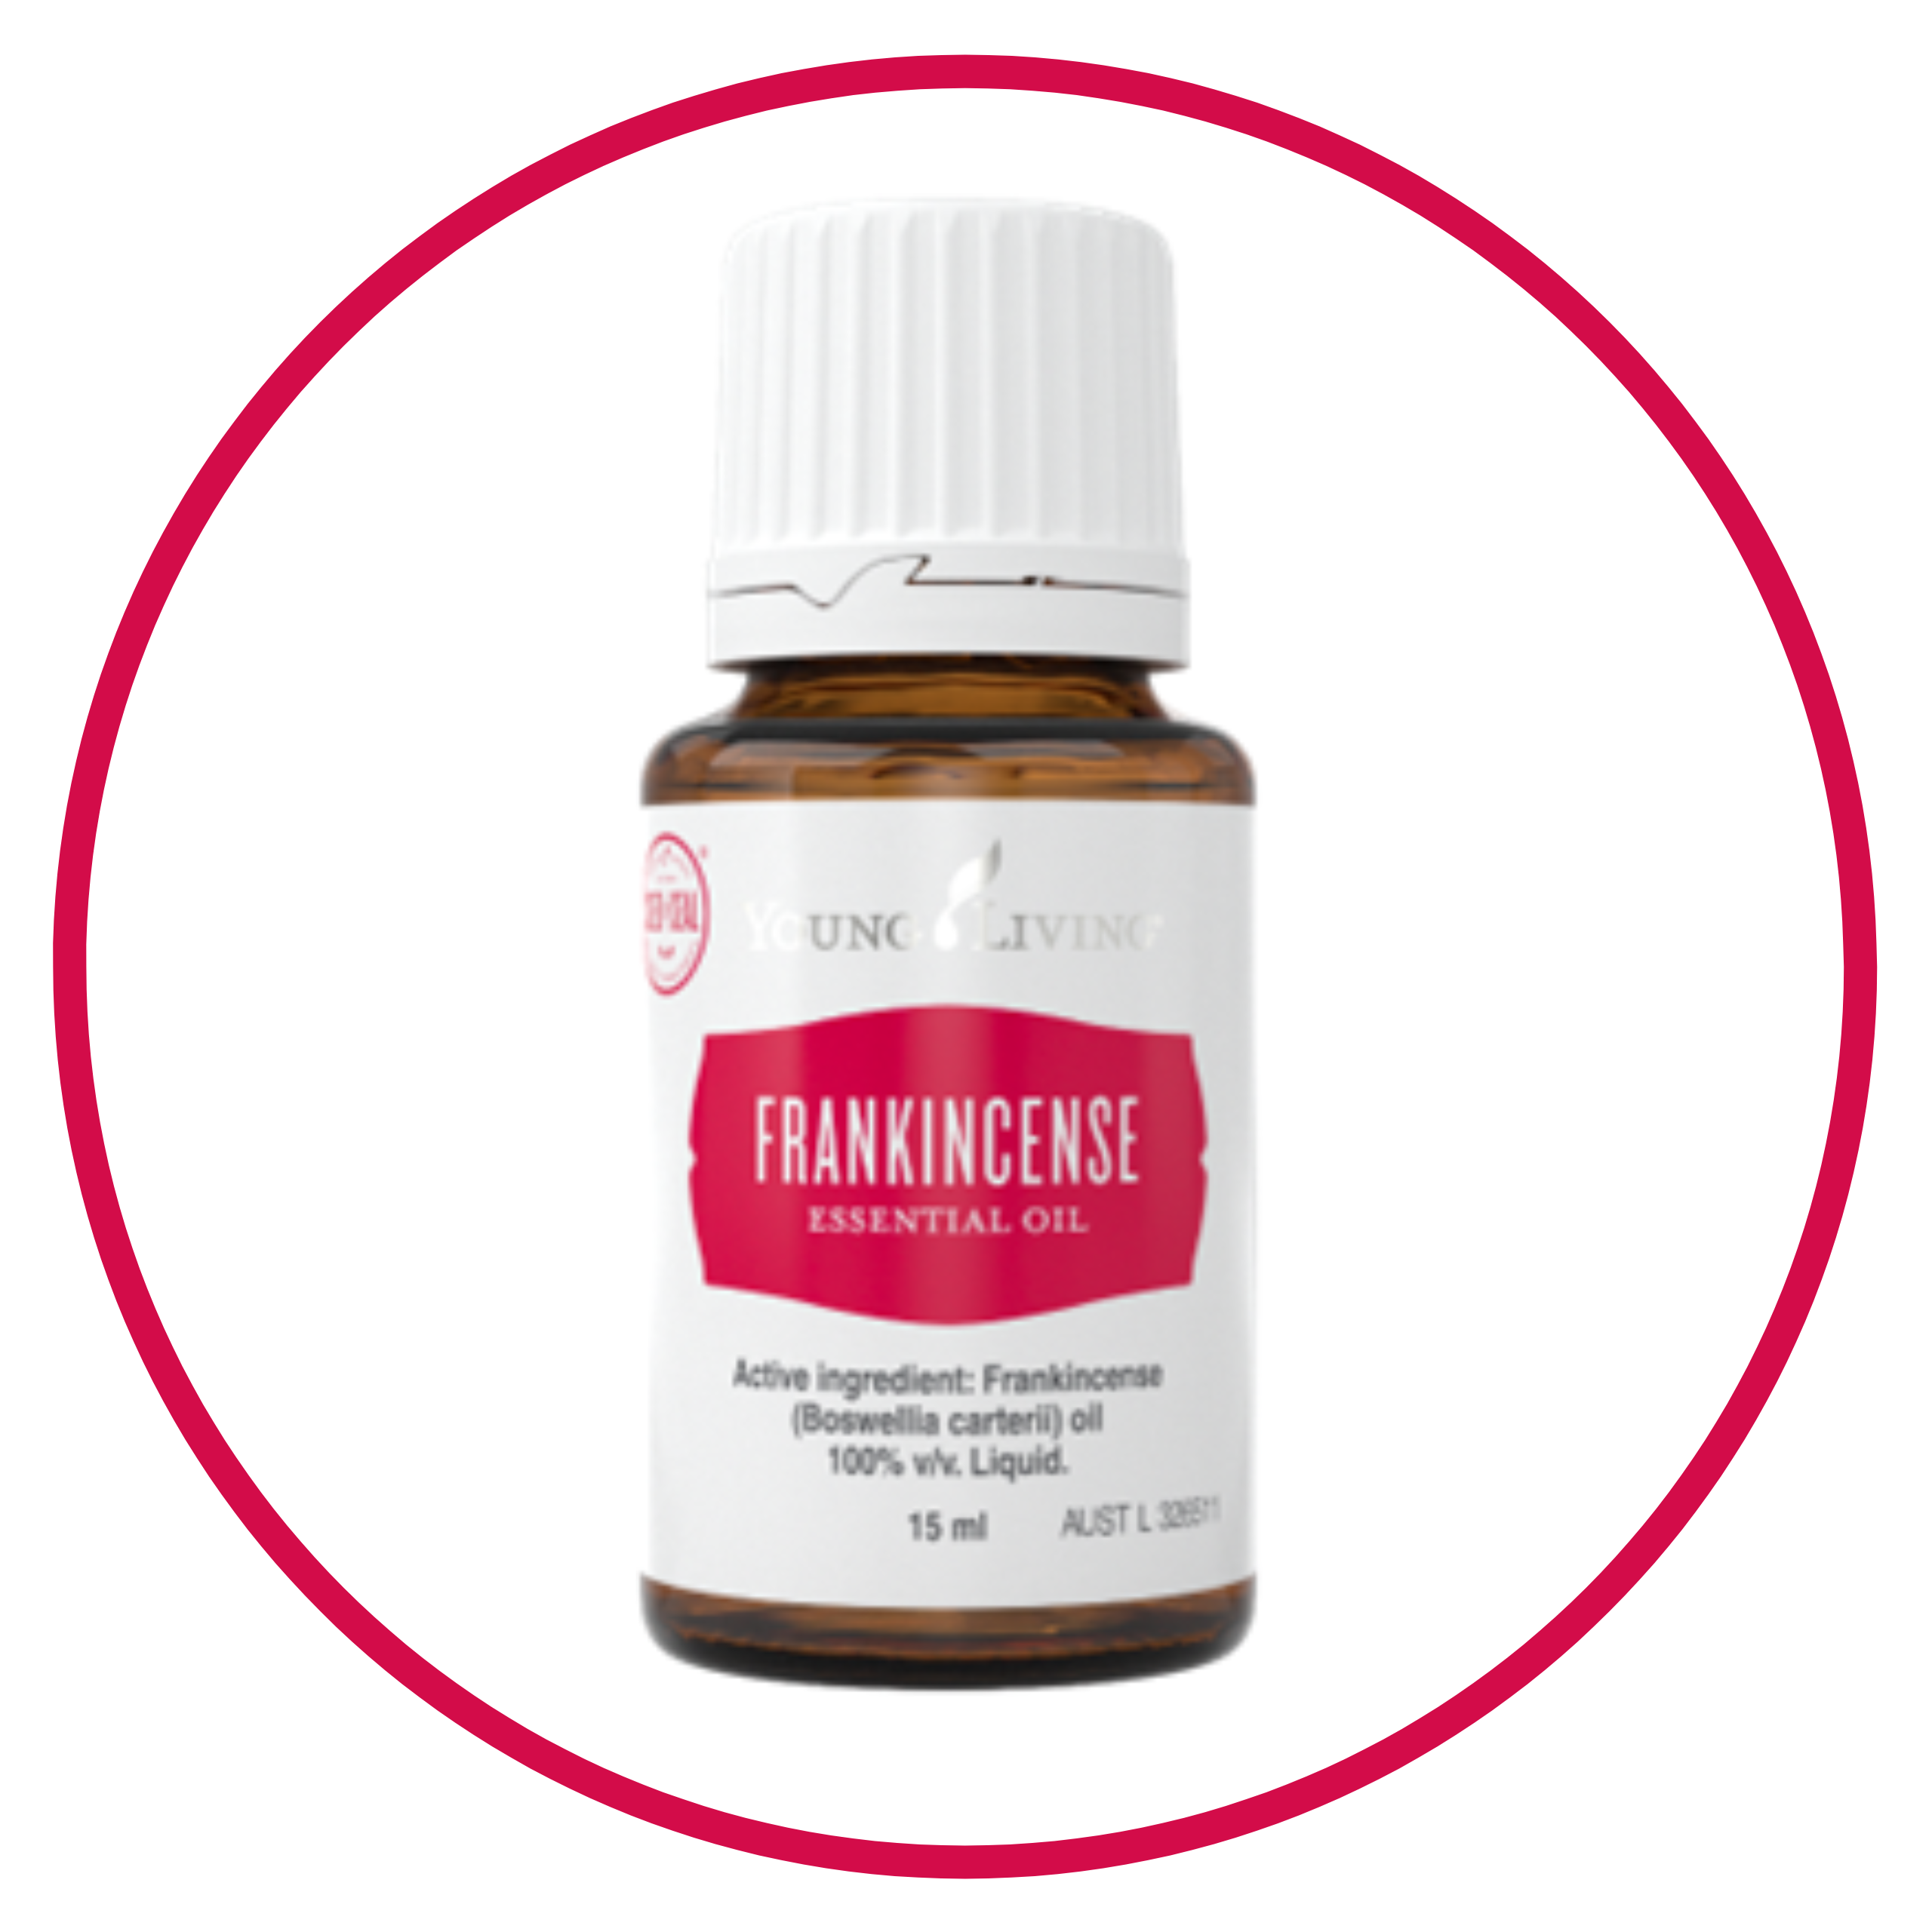 Image of Young Living 'frankincense' essential oil bottle